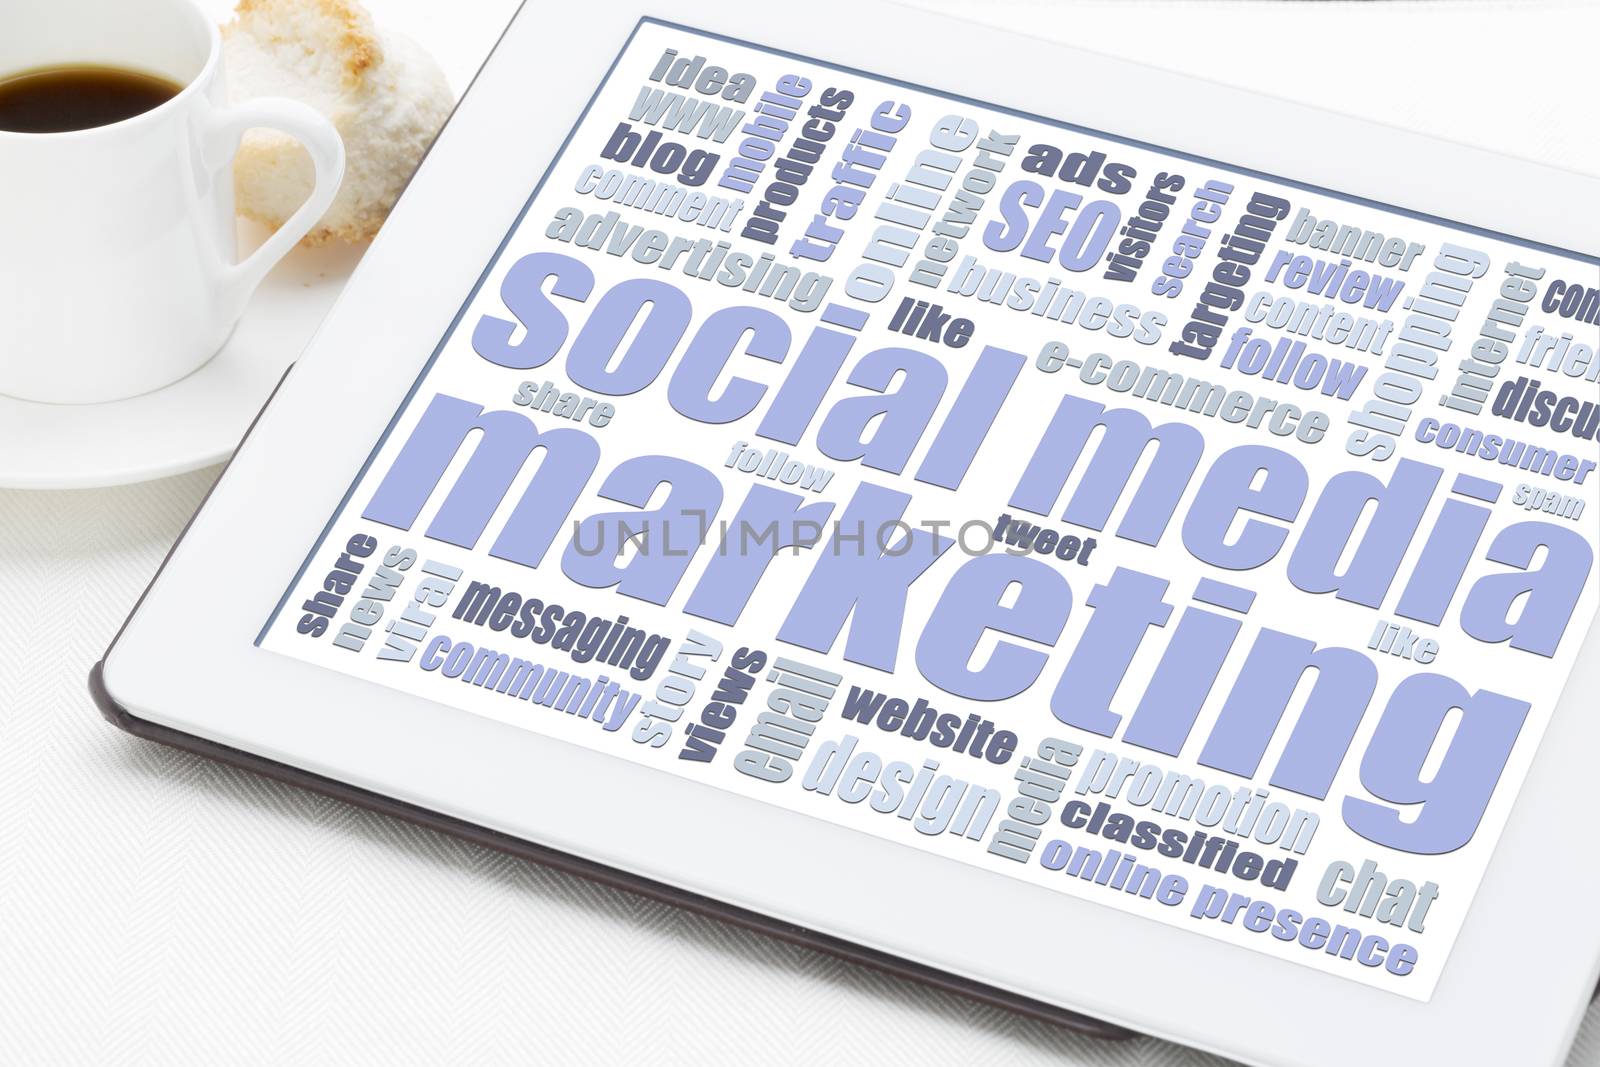 social media marketing concept - a word cloud on a digital tablet with a cup of coffee